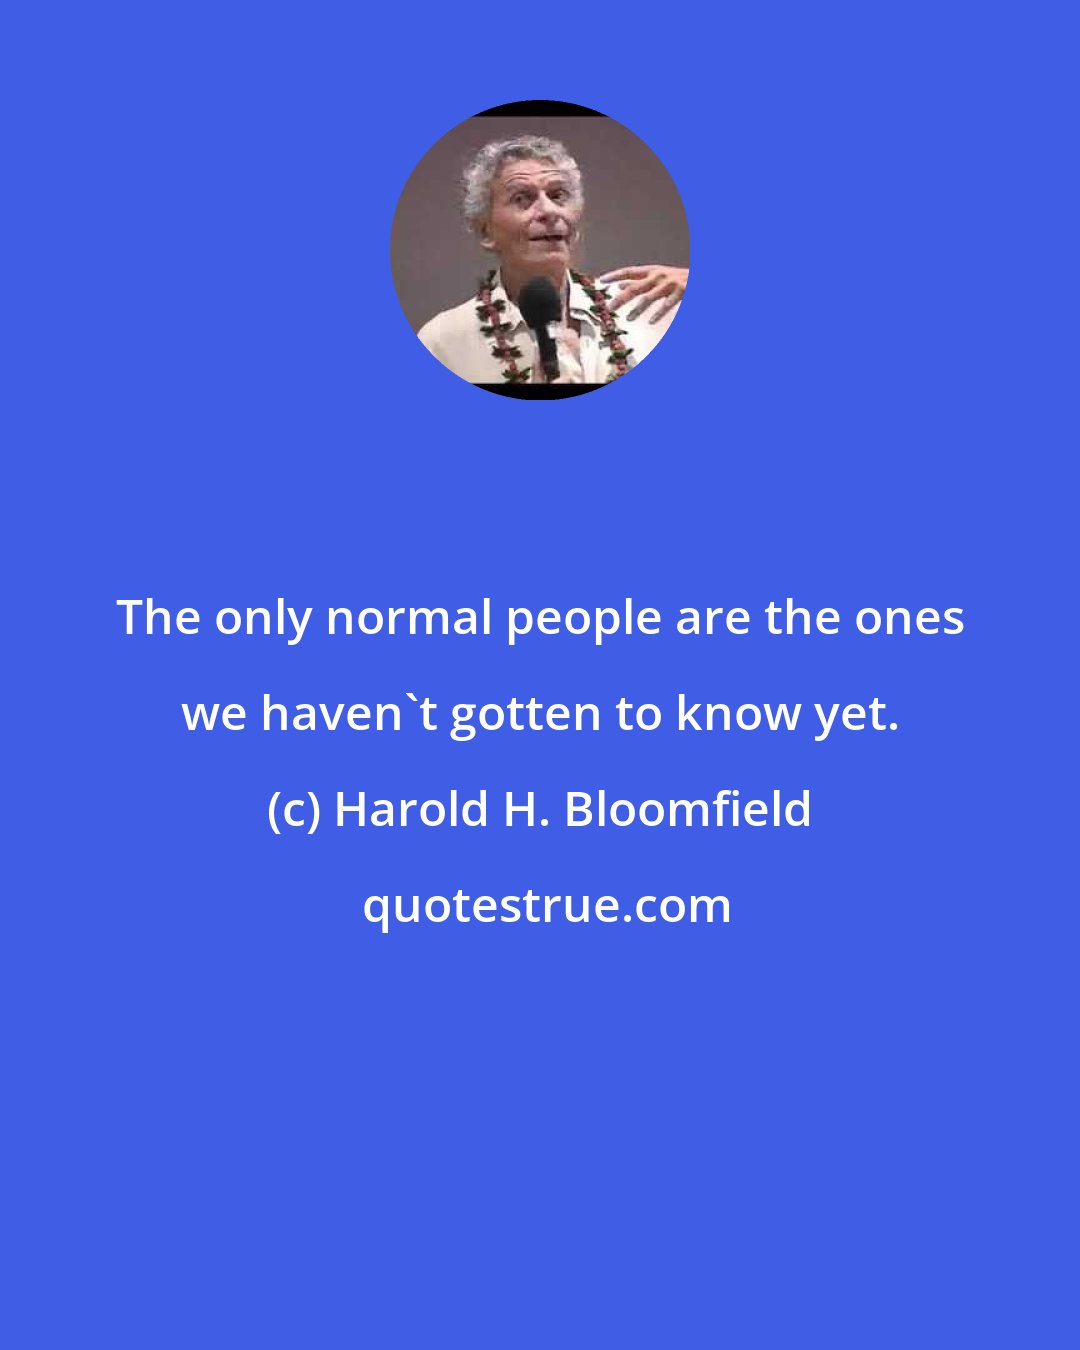 Harold H. Bloomfield: The only normal people are the ones we haven't gotten to know yet.